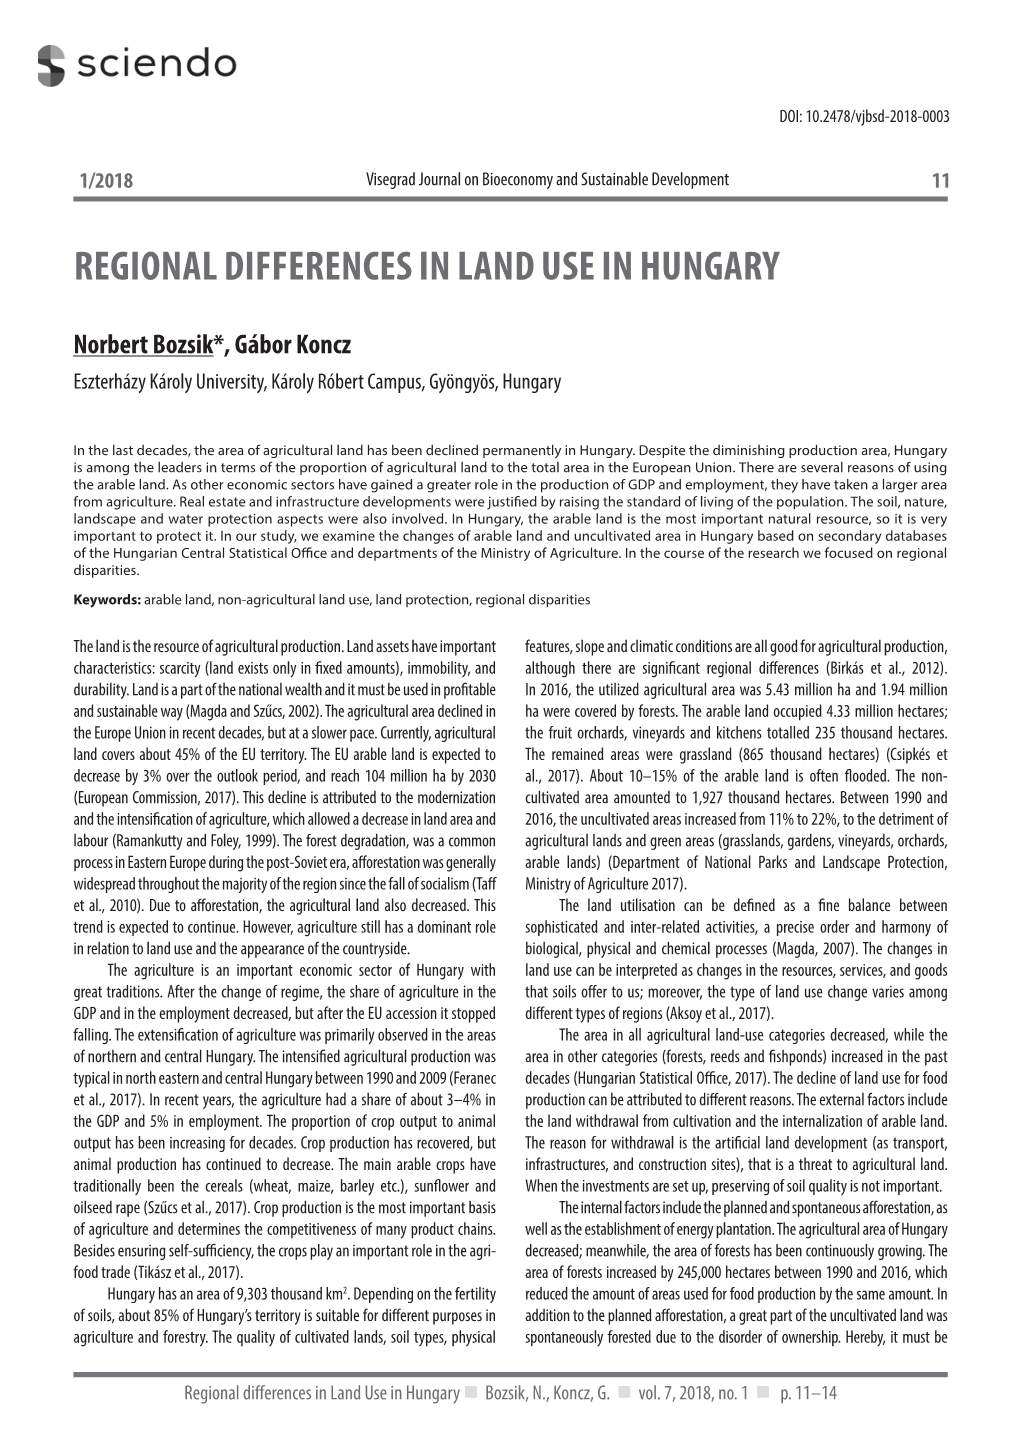 Regional Differences in Land Use in Hungary